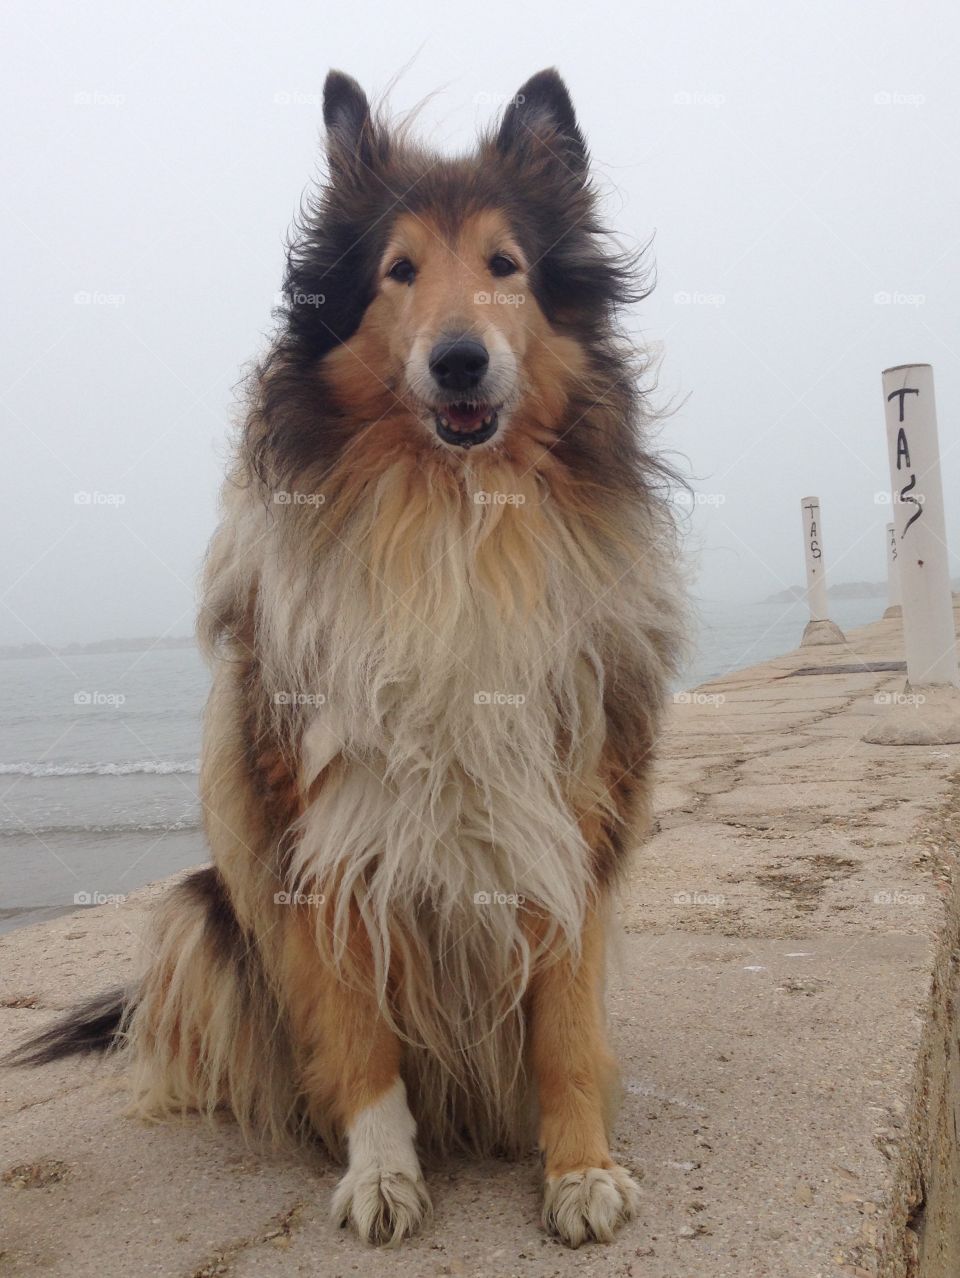 My collie dog Lassie  at the beach, sitting on a pier on the sea and close to water in a foggy morning near the shore